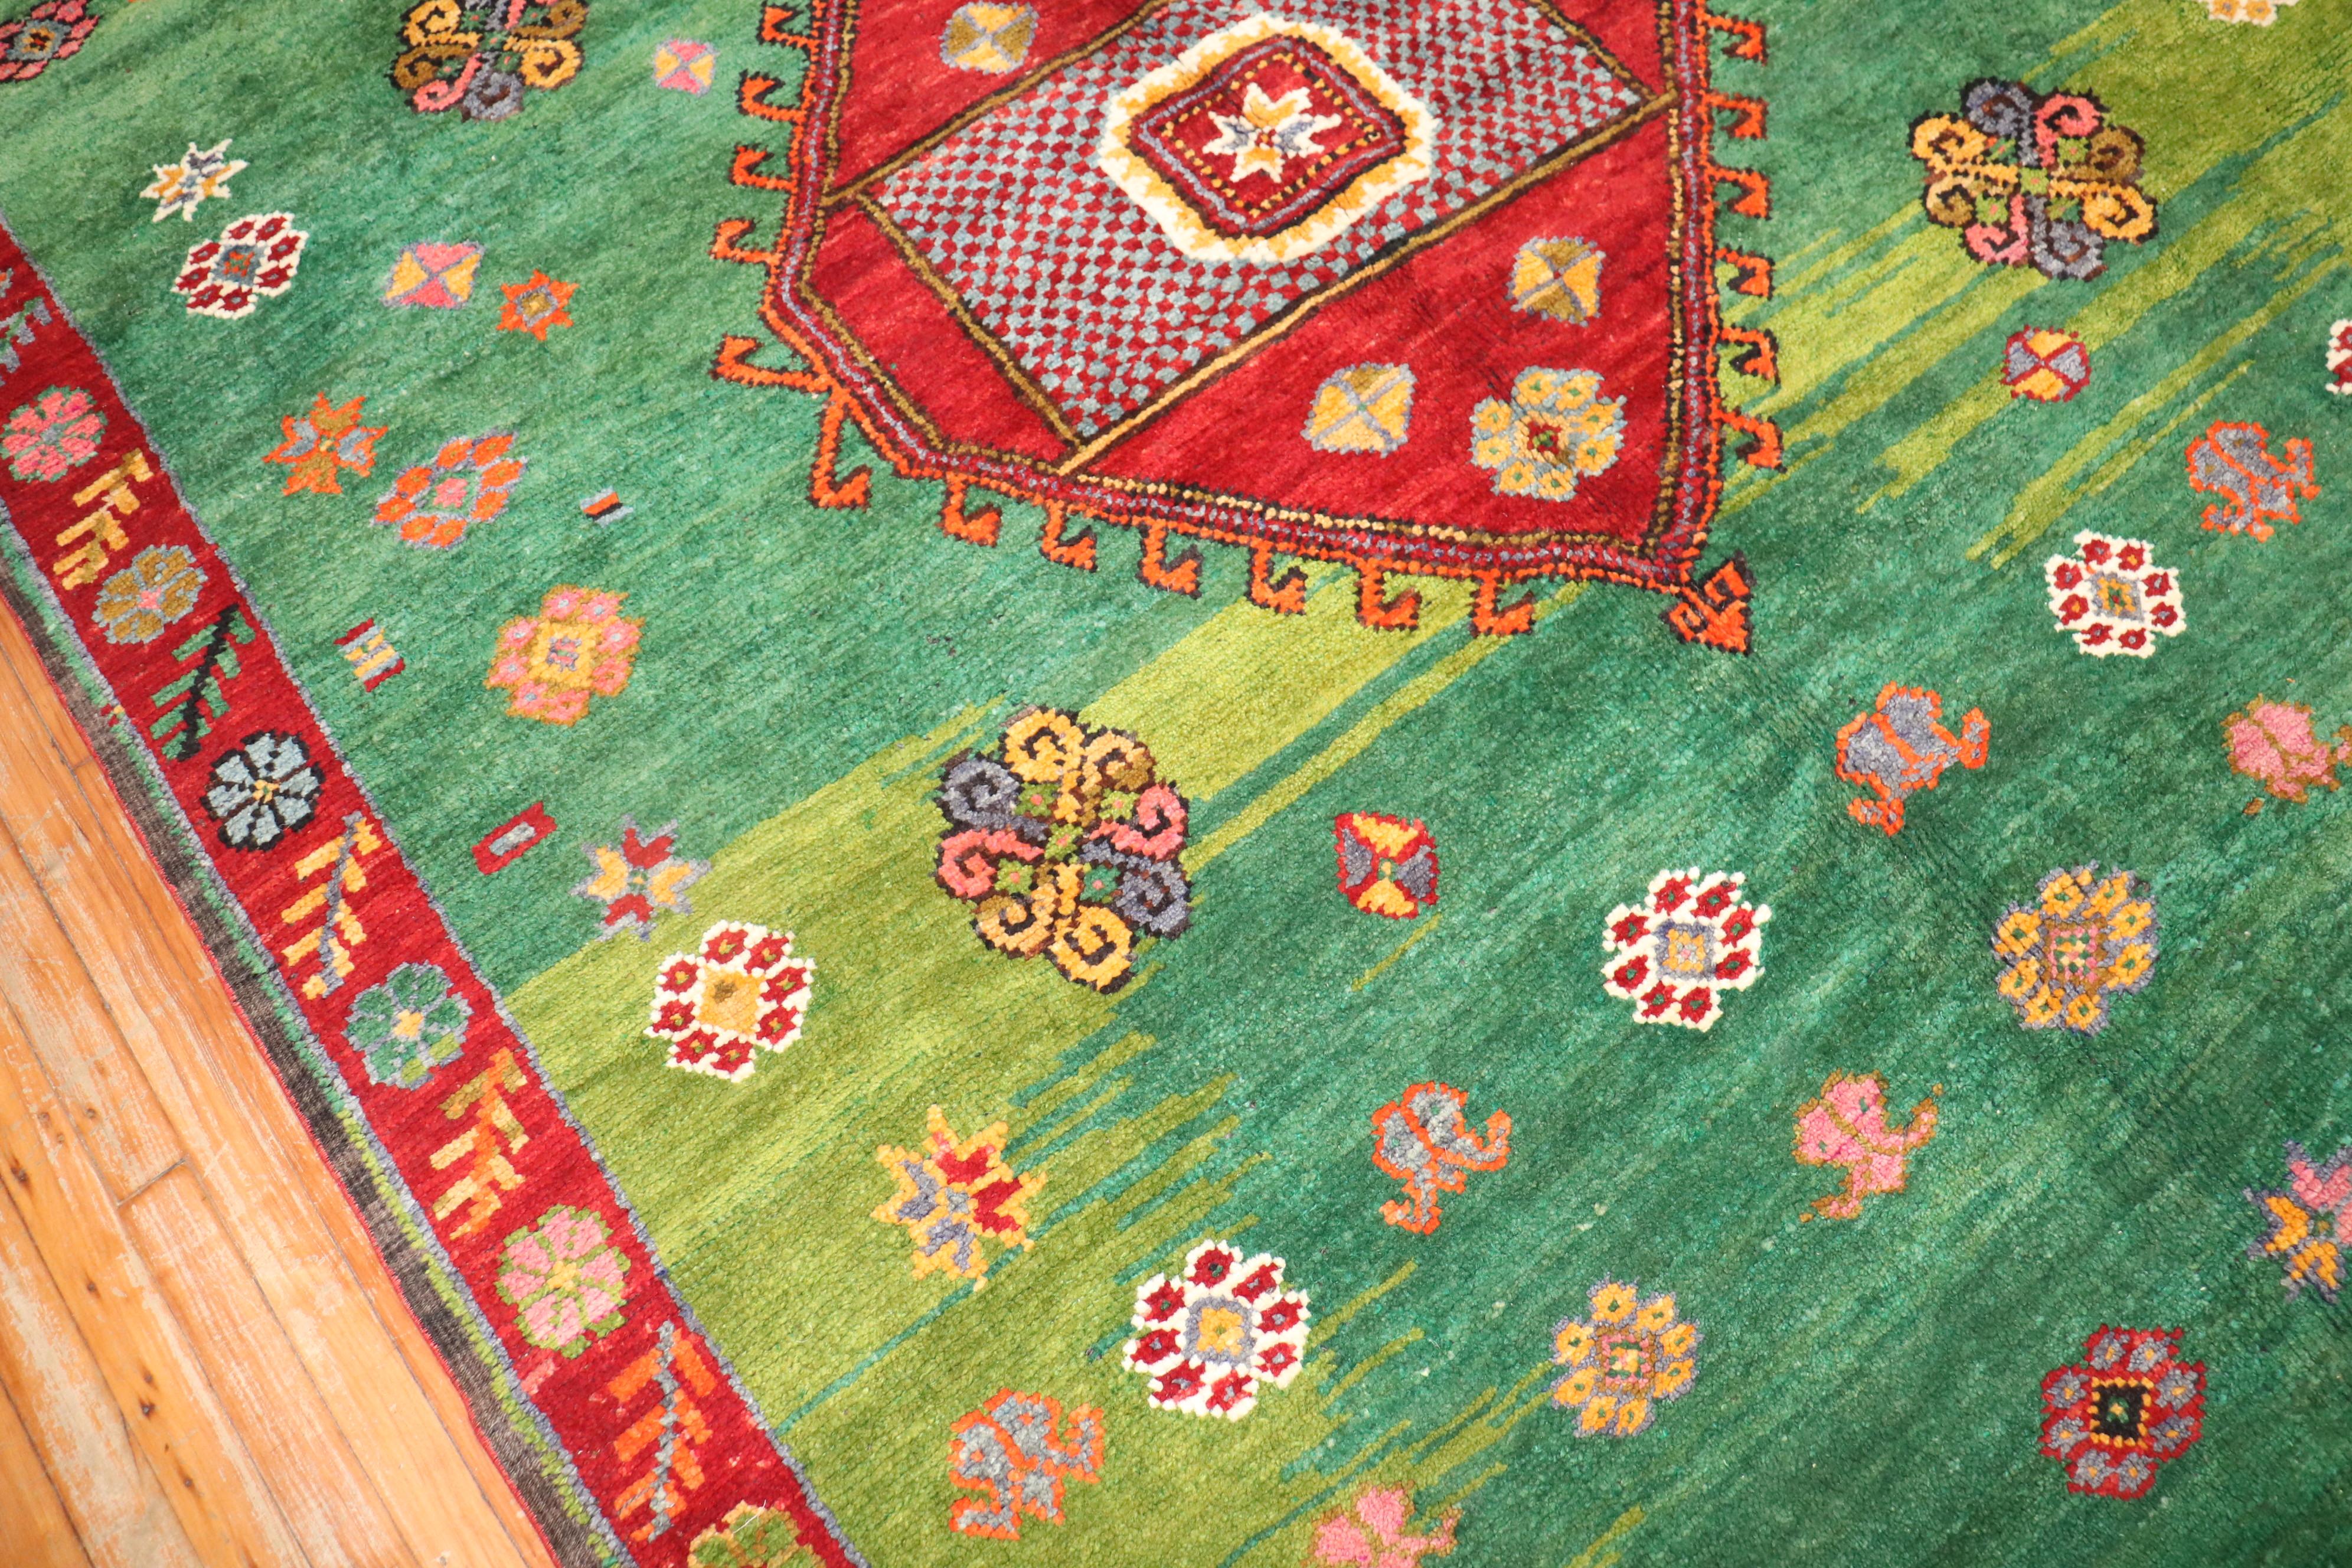 Bohemian mid 20th Century Turkish Rug with a floral design on a striated green field.

6'11'' x 12'9''